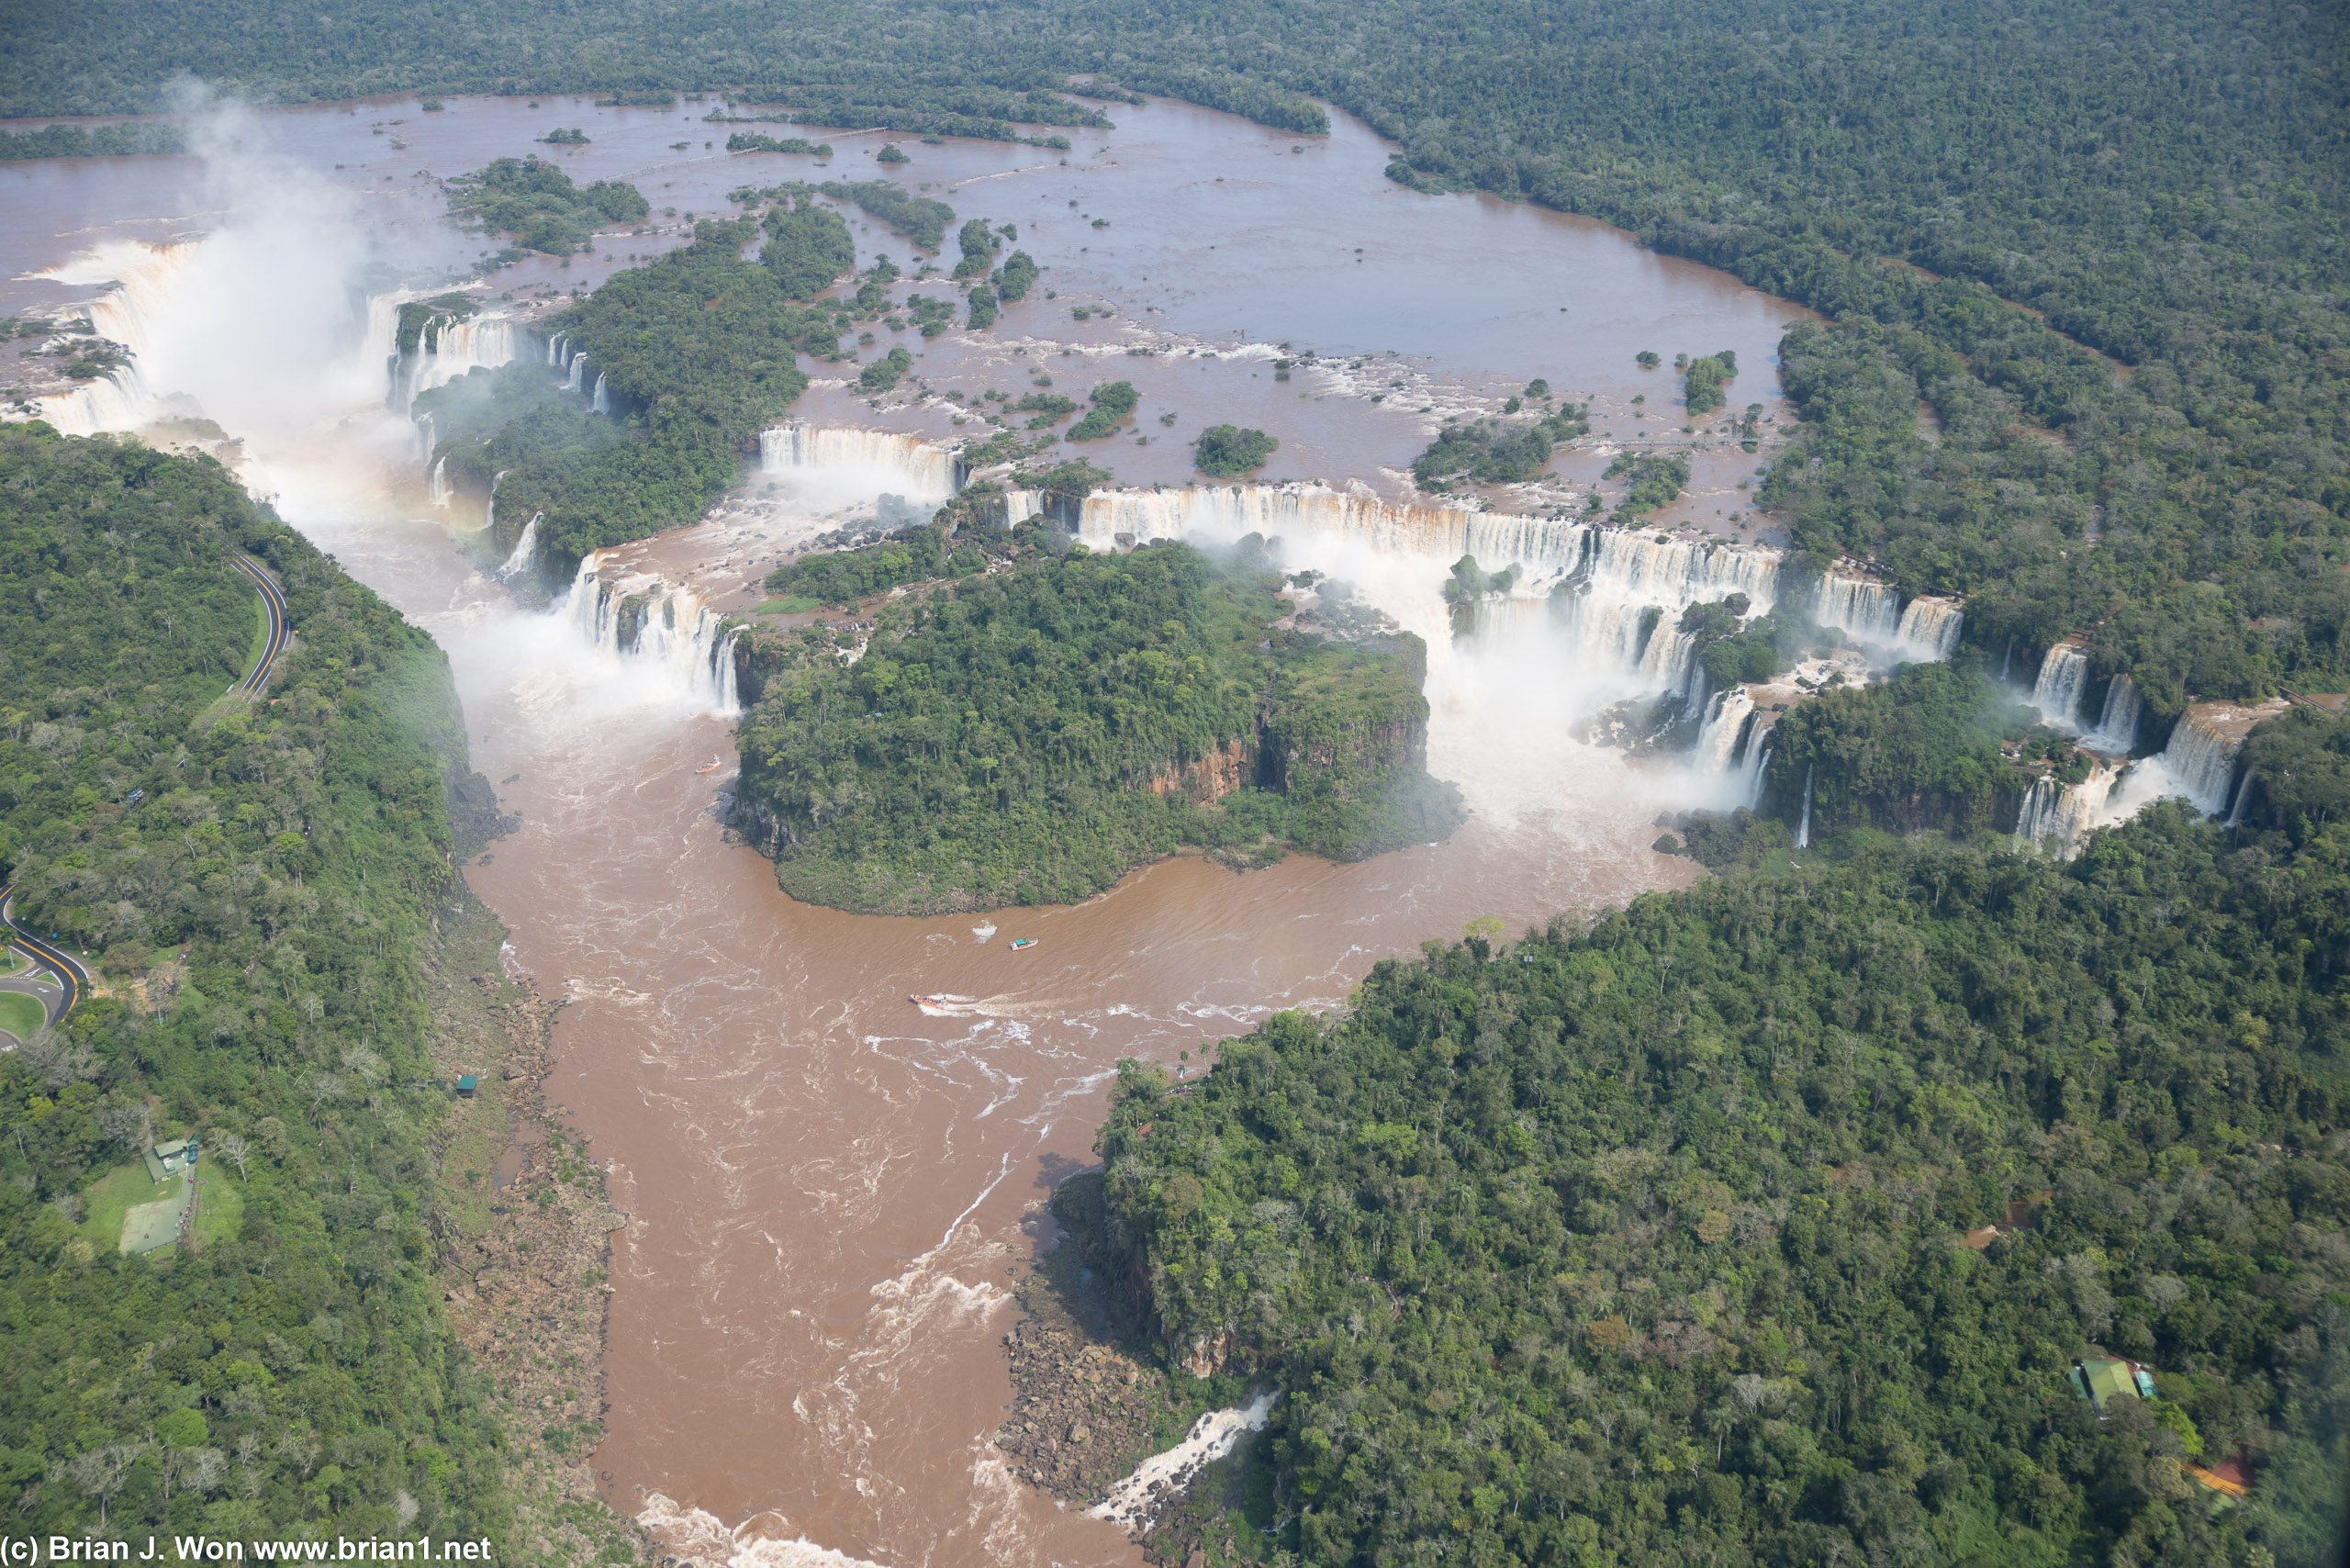 Rainbows, mist, and Iguazu Falls, with San Martin Island prominently in the middle of the falls.